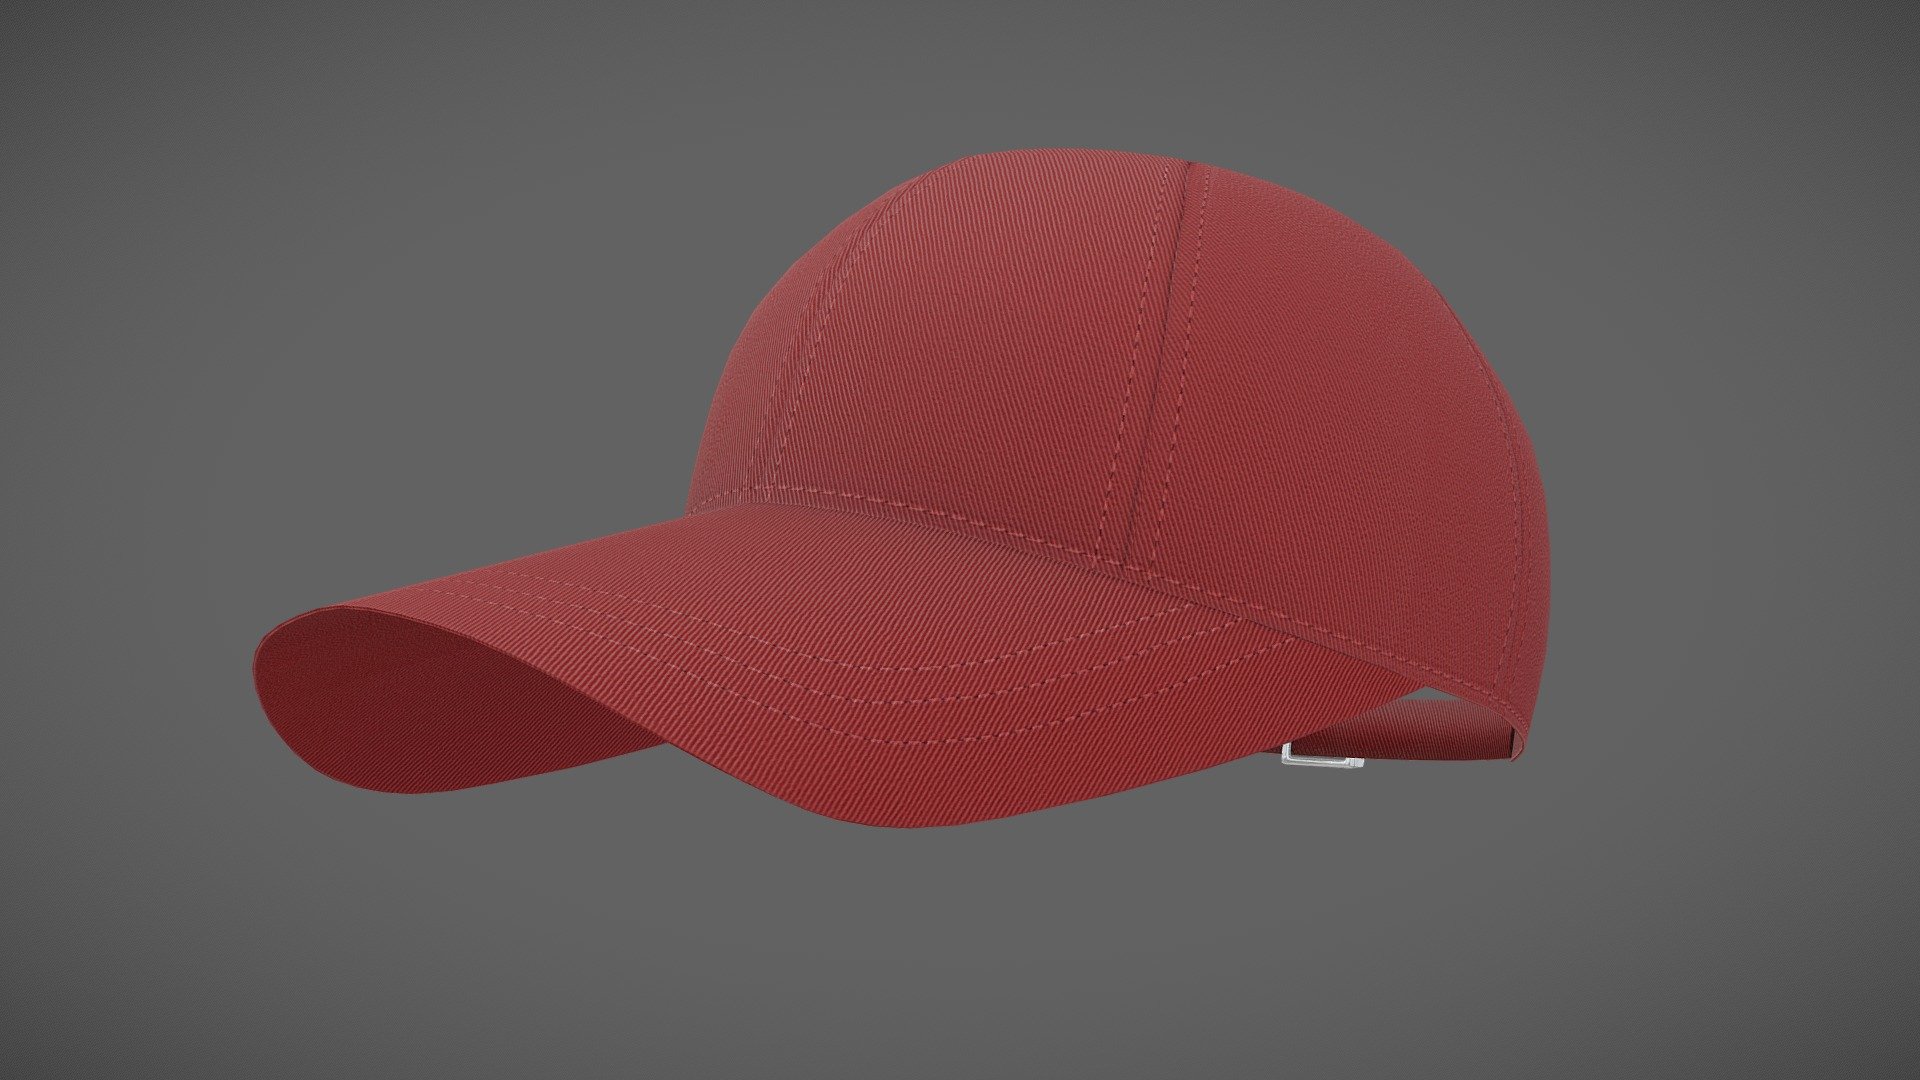 Baseball hat lowpoly
This is a Lowpoly PBR model ready for use in AR, VR, Realtime Visualizations, Games with 4K Textures.

Features: Low-poly game ready PBR Model, Real-World Scale, High-quality 4K Textures 3d model